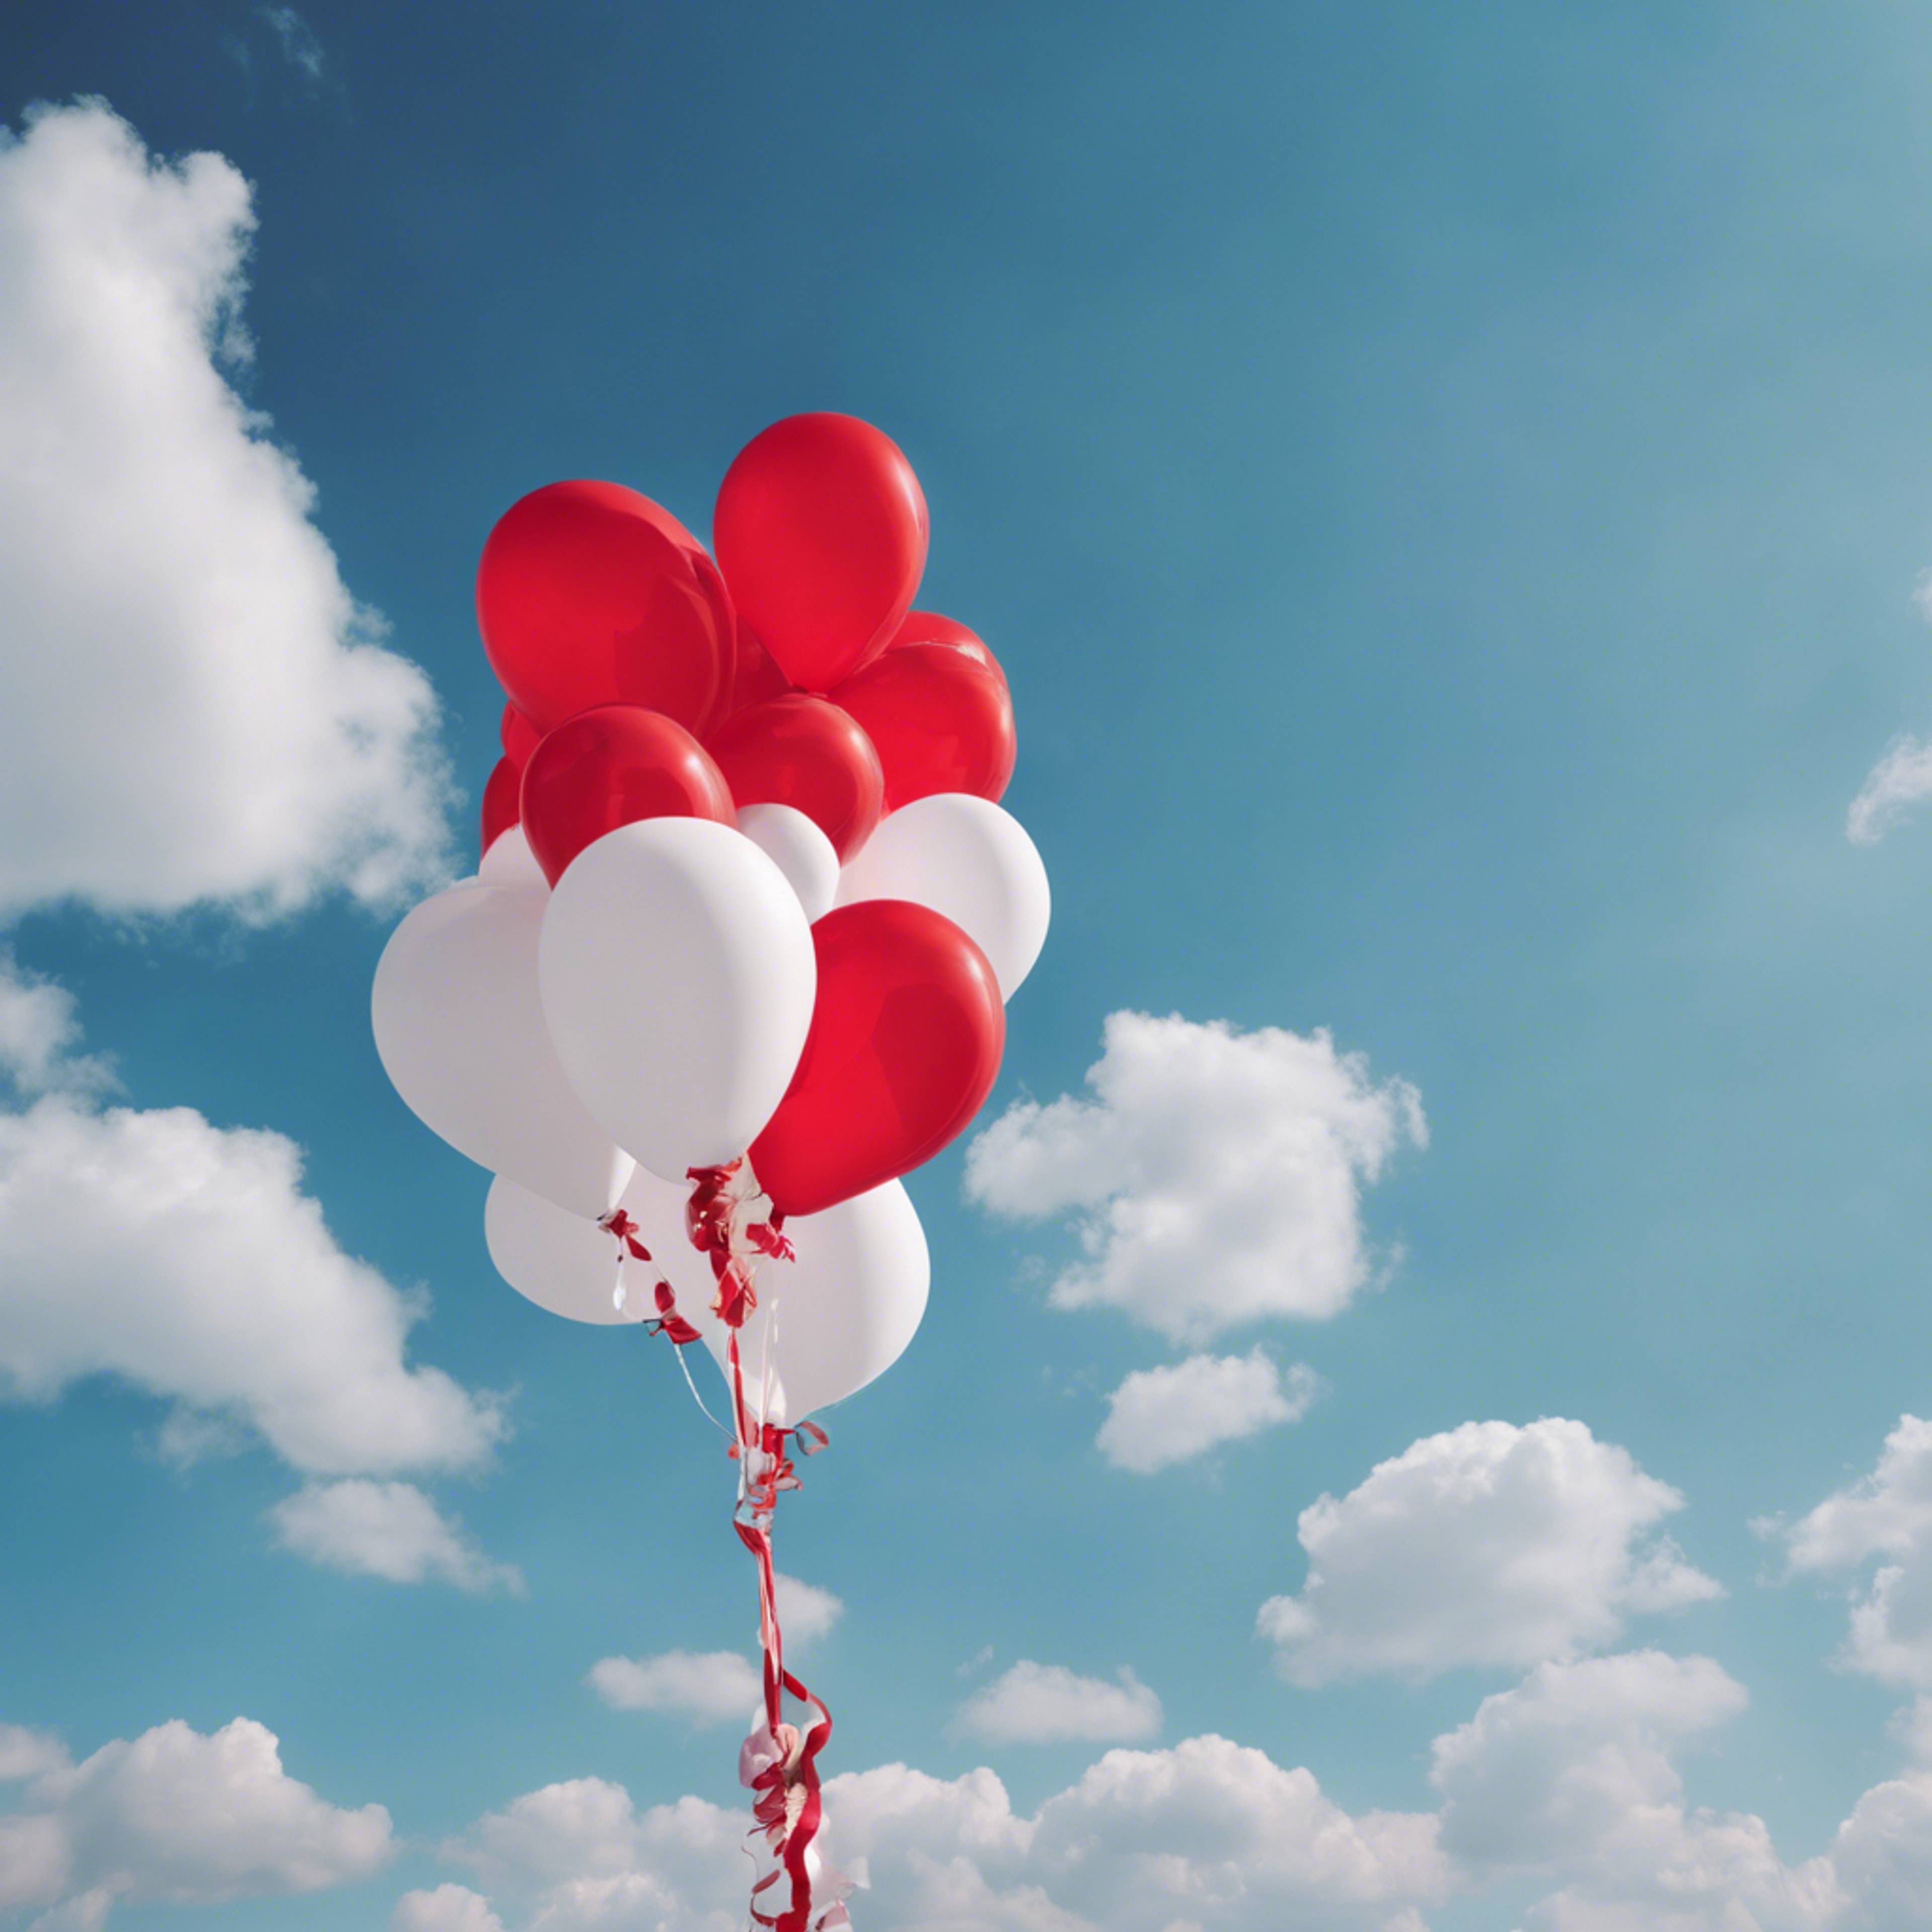 Festive red and white balloons strung together against the blue sky. Тапет[5b7b2fc281444a4c8d70]